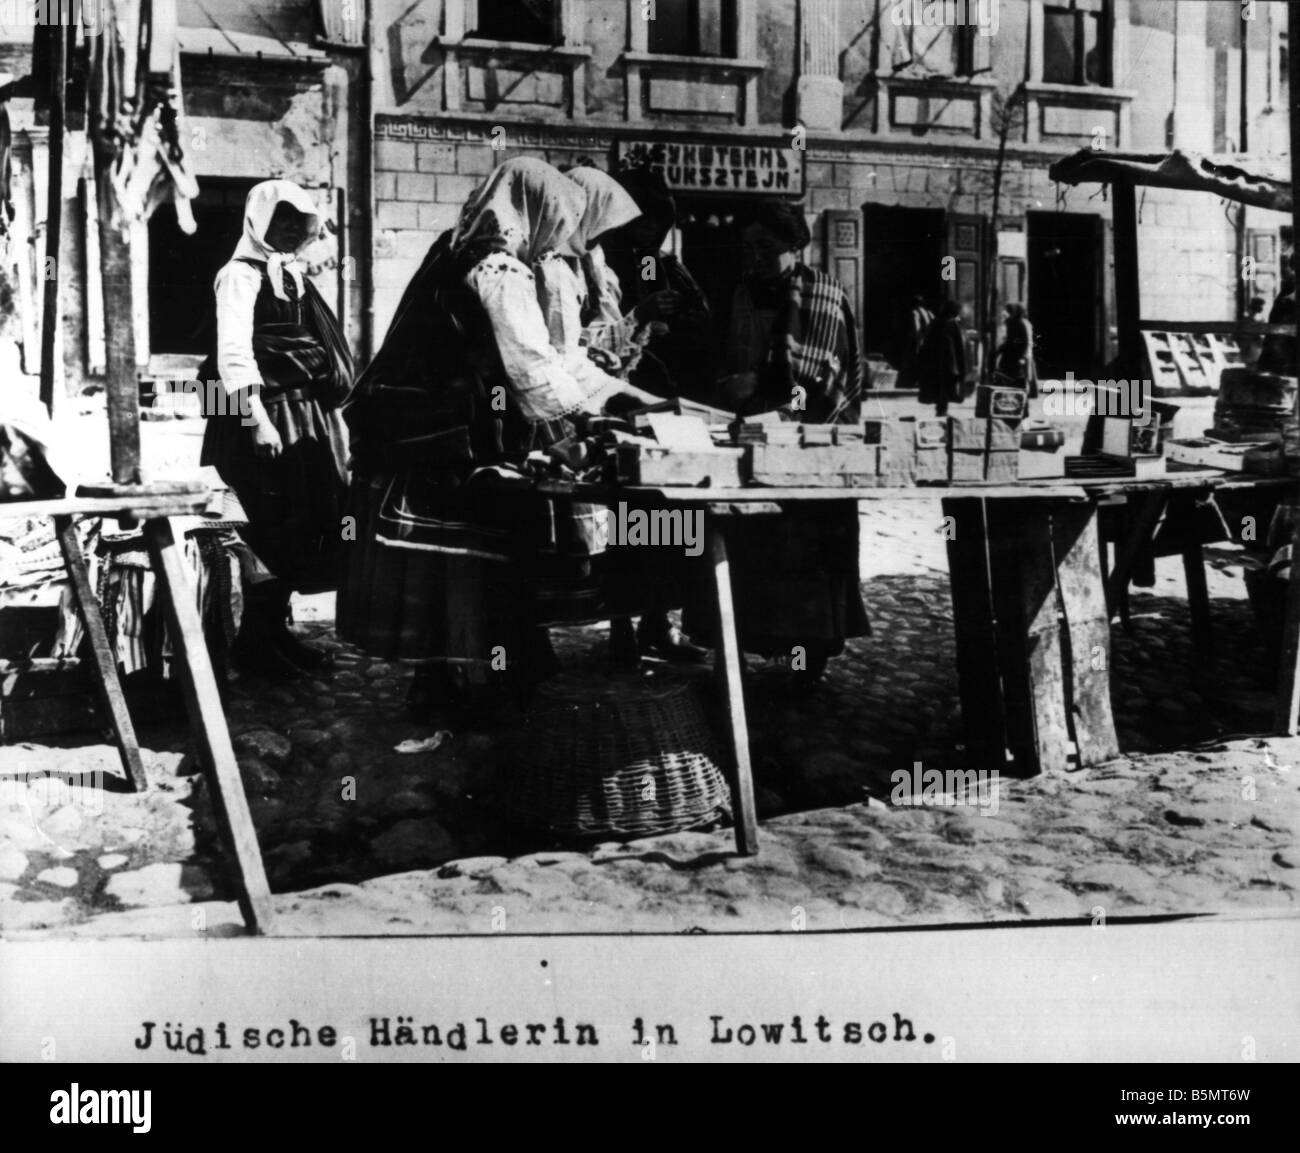 9IS 1915 0 0 A1 27 Jewish saleswoman in Lowitsch 1915 History of Judaism Eastern Jews Jewish saleswoman in Lowitsch Lowicz west Stock Photo